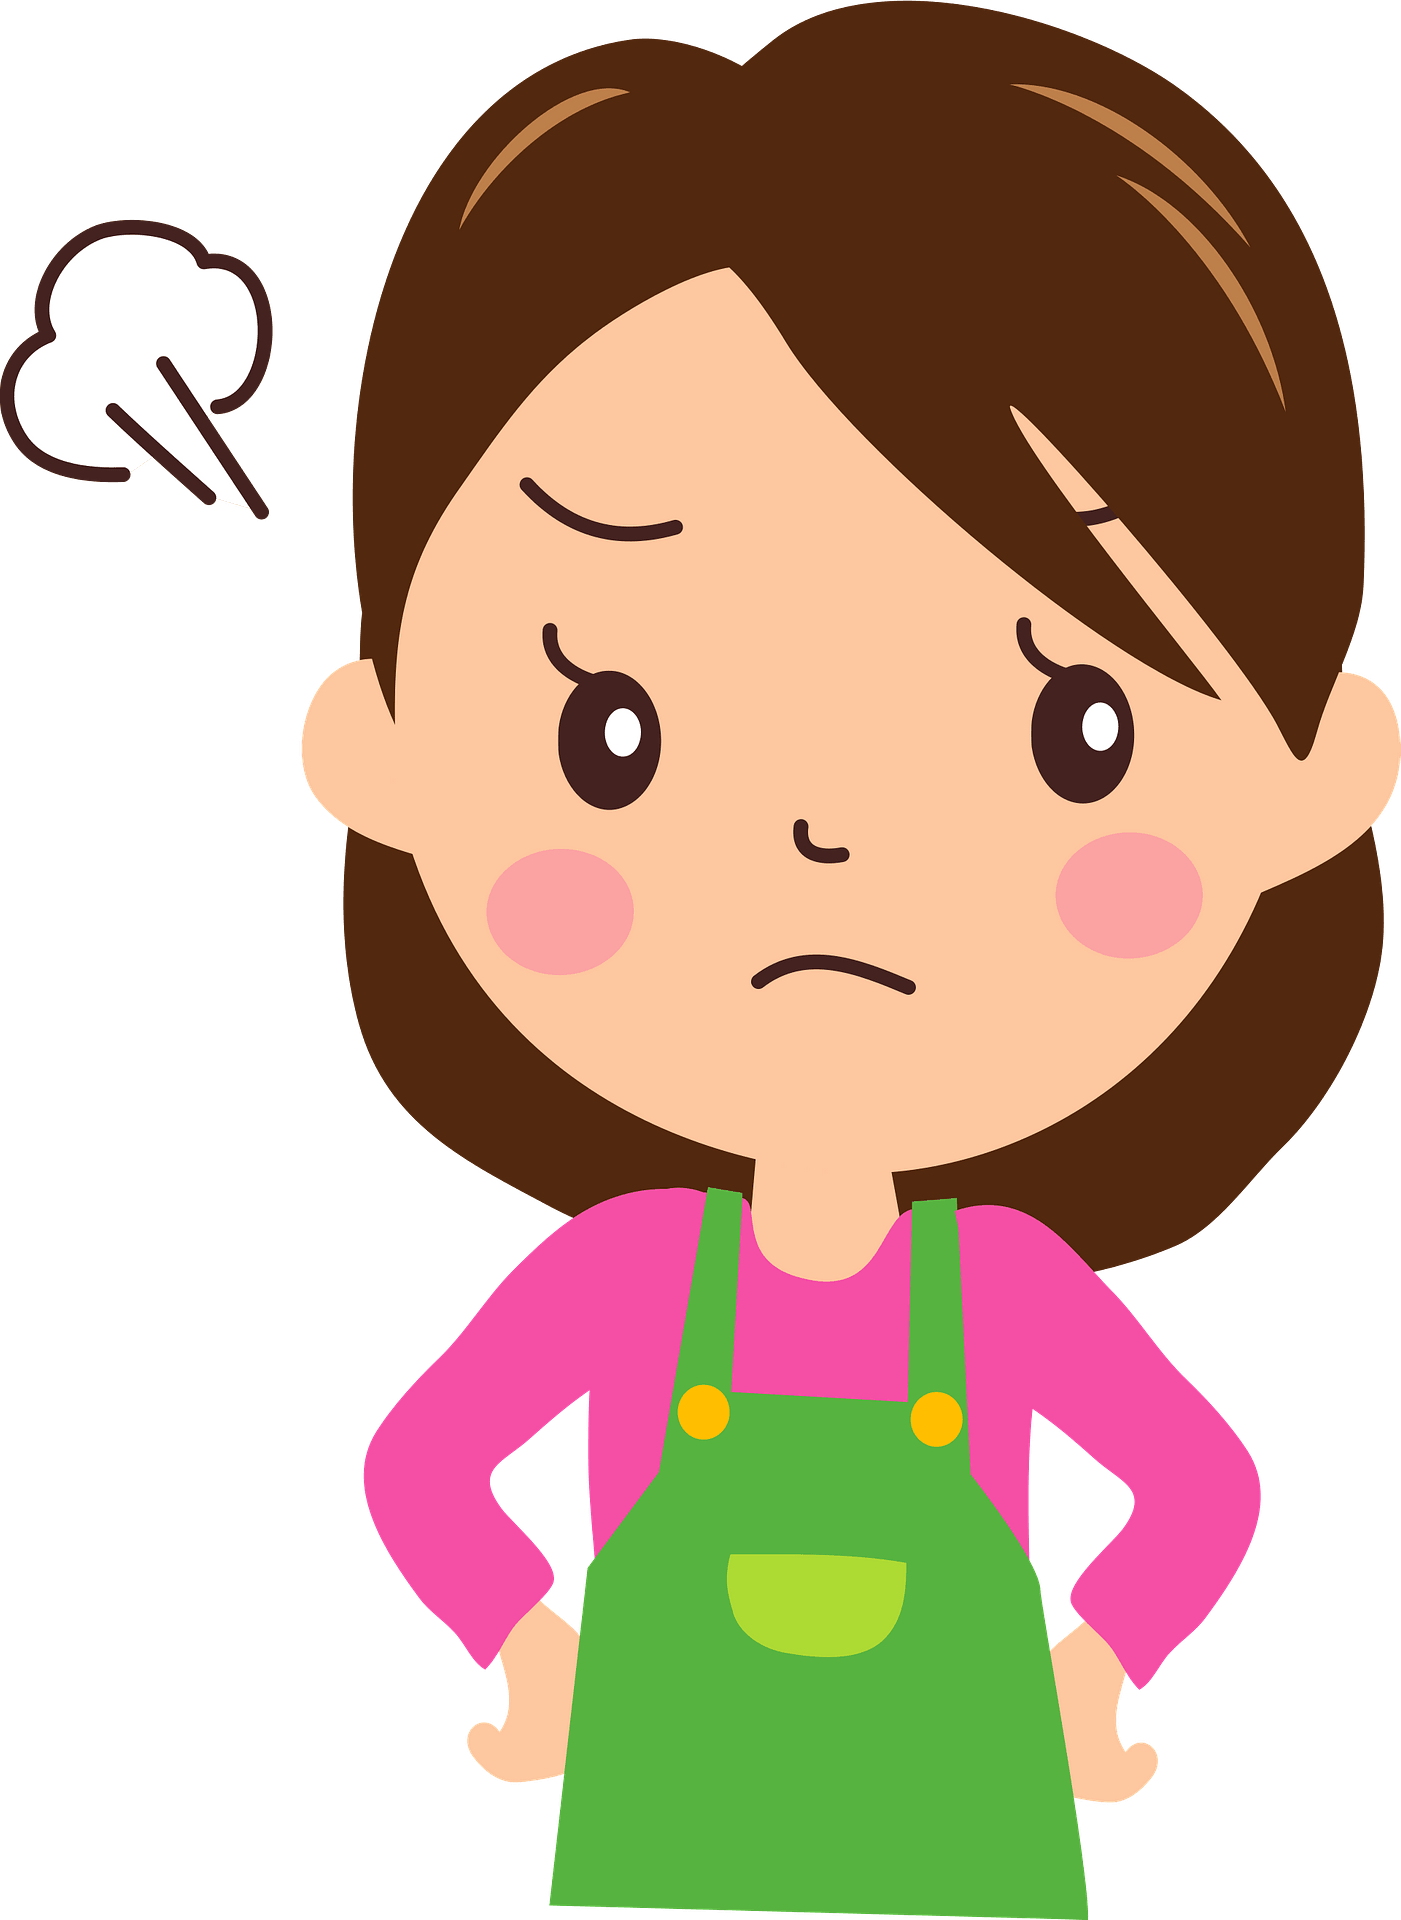 Angry Woman PNG Background Image